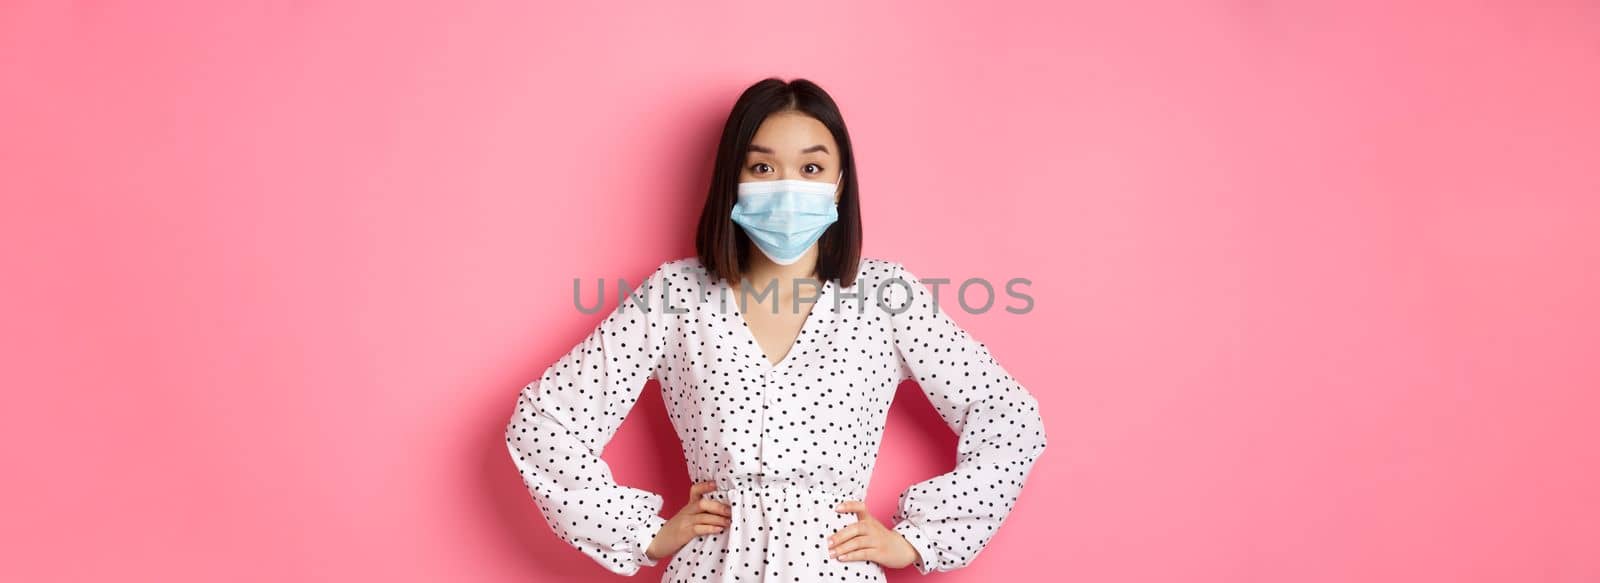 Covid-19, quarantine and lifestyle concept. Cute korean woman in dress and face mask using preventive measures from coronavirus, standing over pink background.